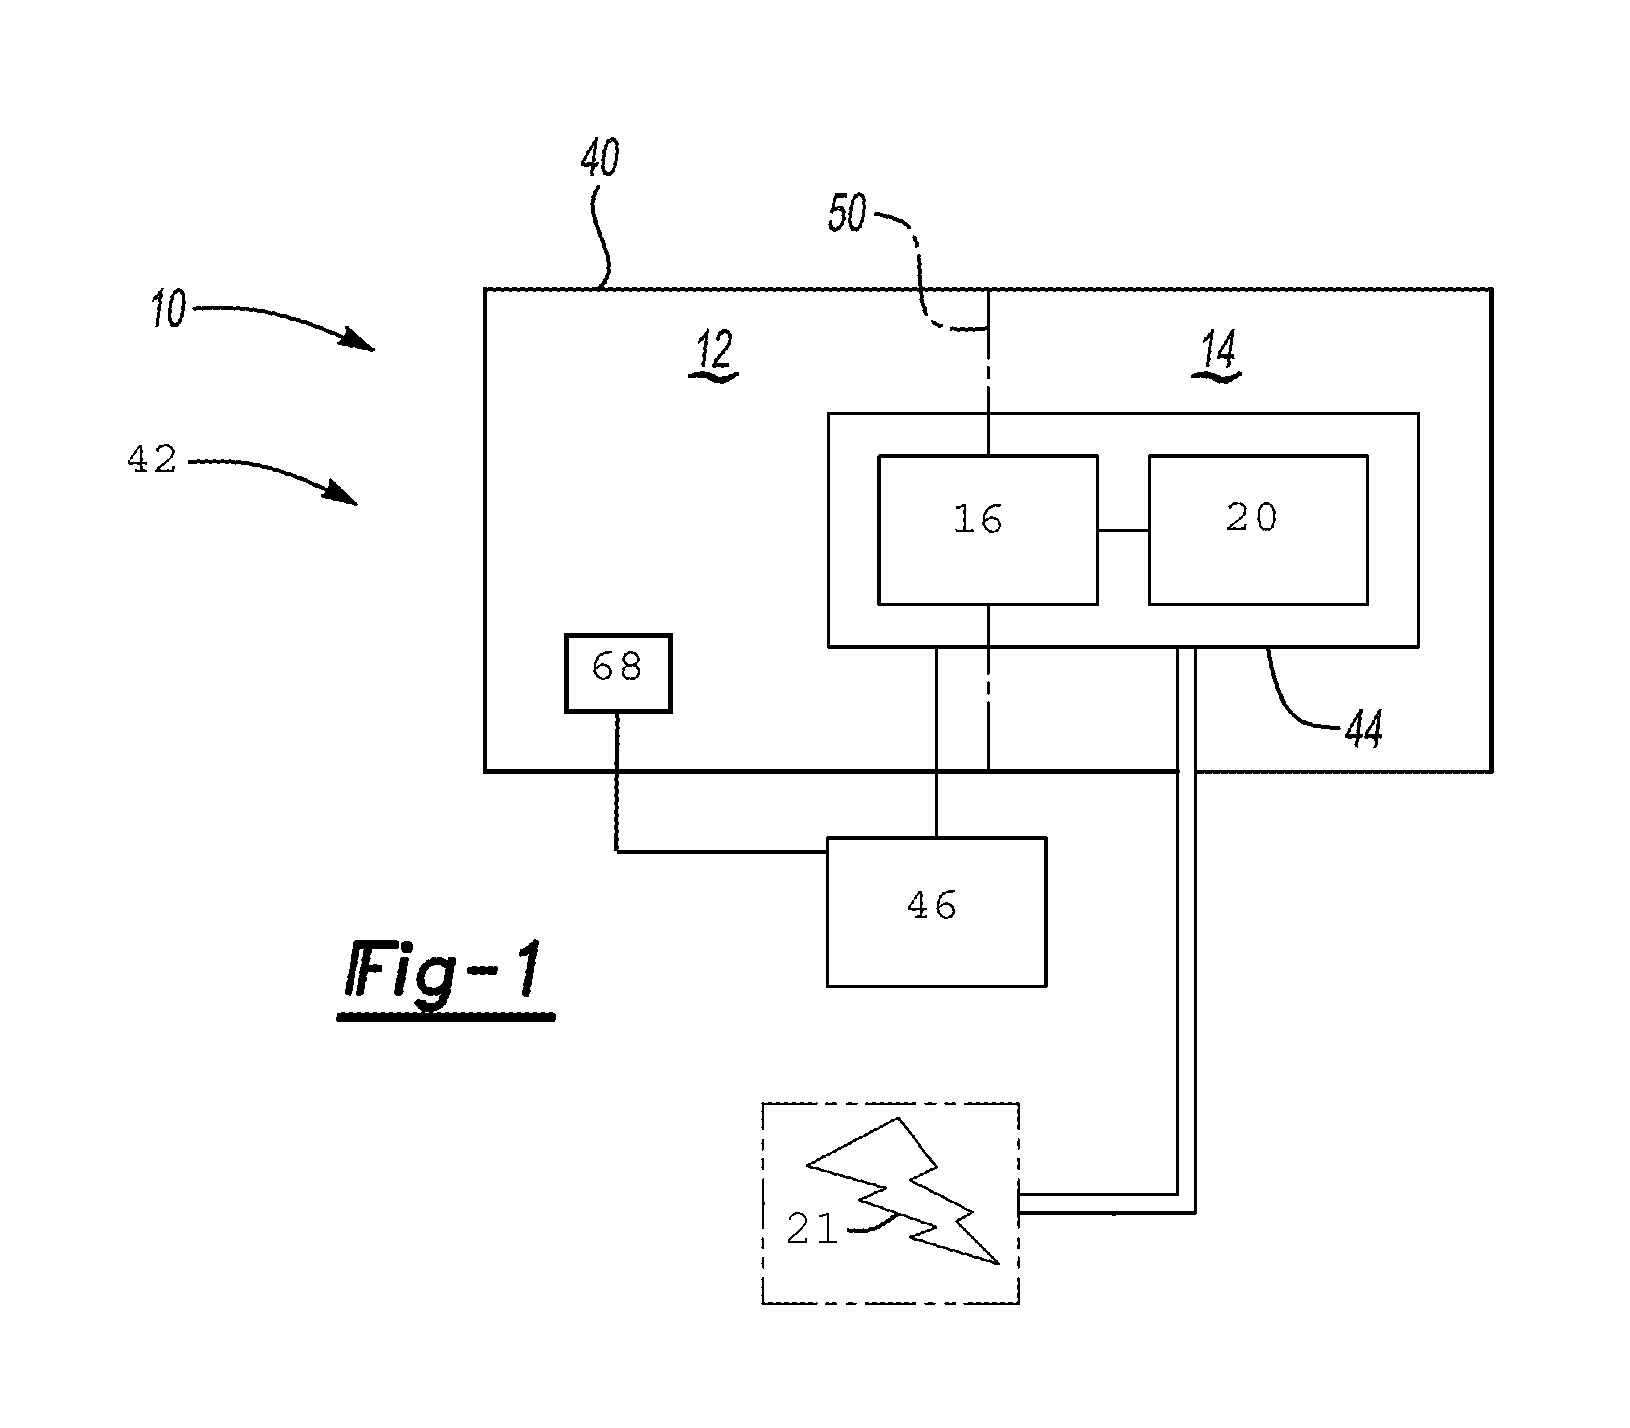 Method of controlling a thermal energy harvesting system